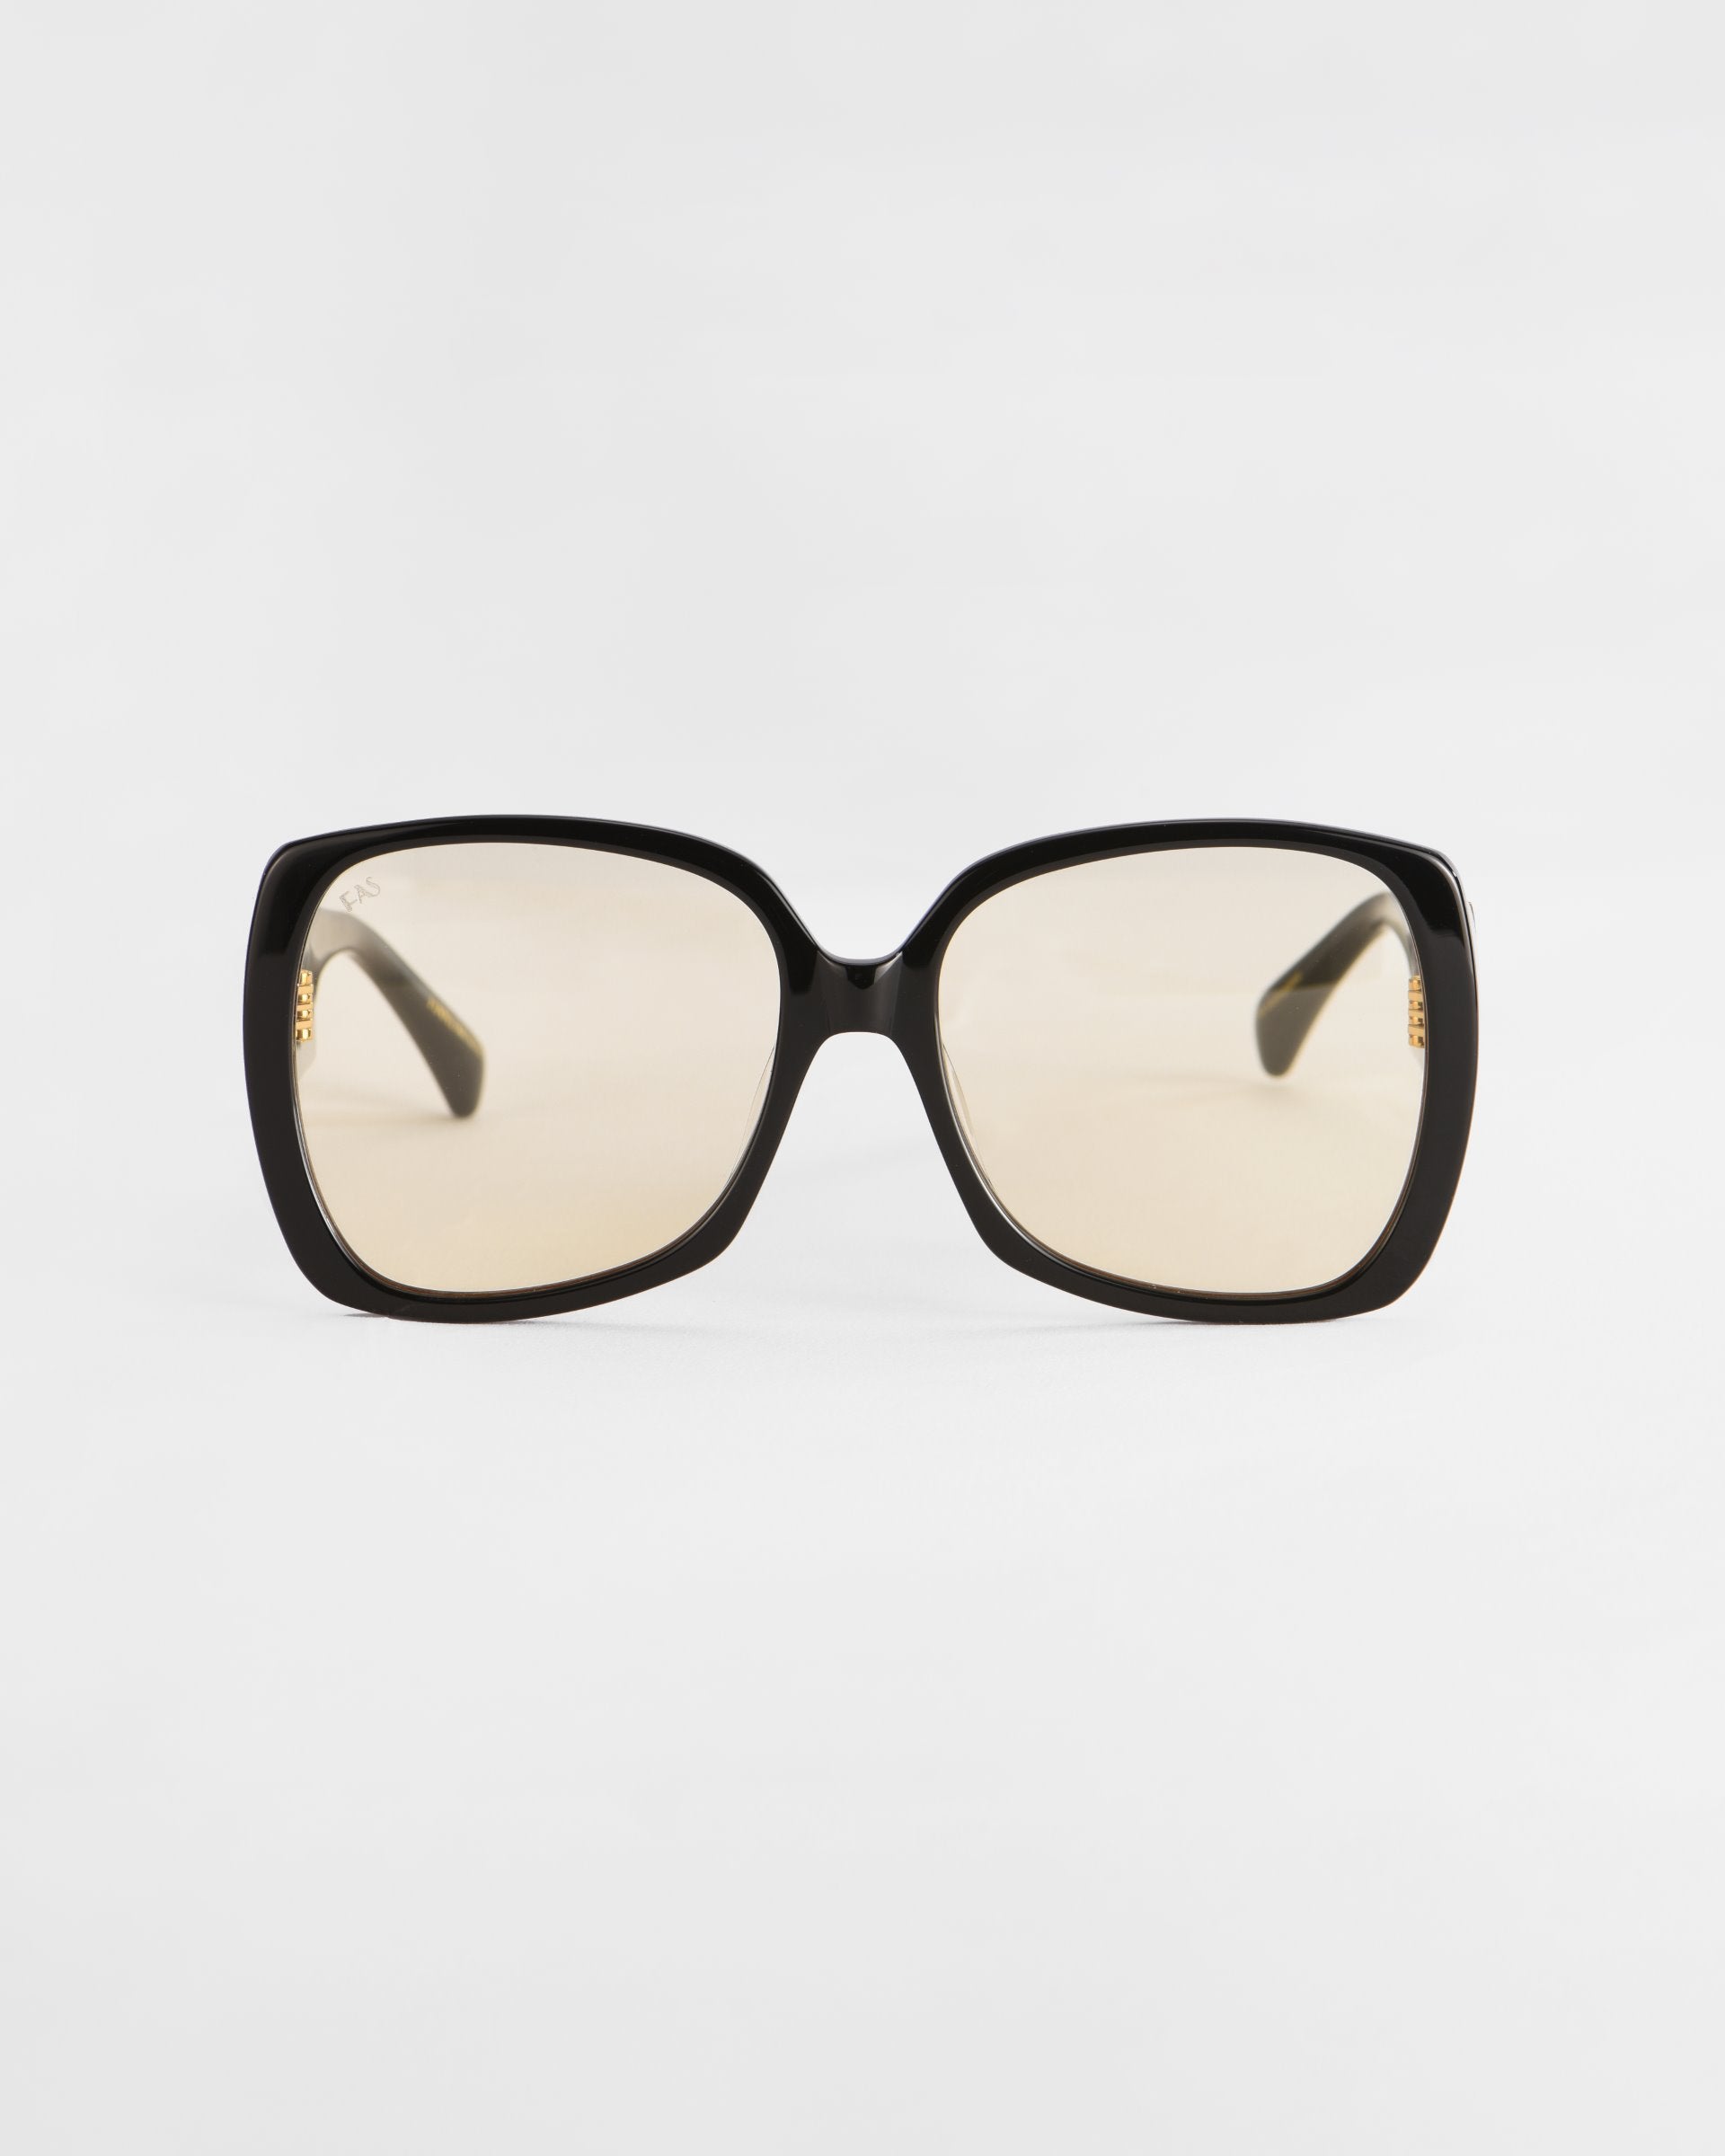 A pair of oversized, square-shaped Odyssey sunglasses with black frames and lightweight nylon lenses from For Art's Sake® is centered against a white background. The design is simple and sleek, emphasizing the eyewear's fashion-forward and contemporary style.